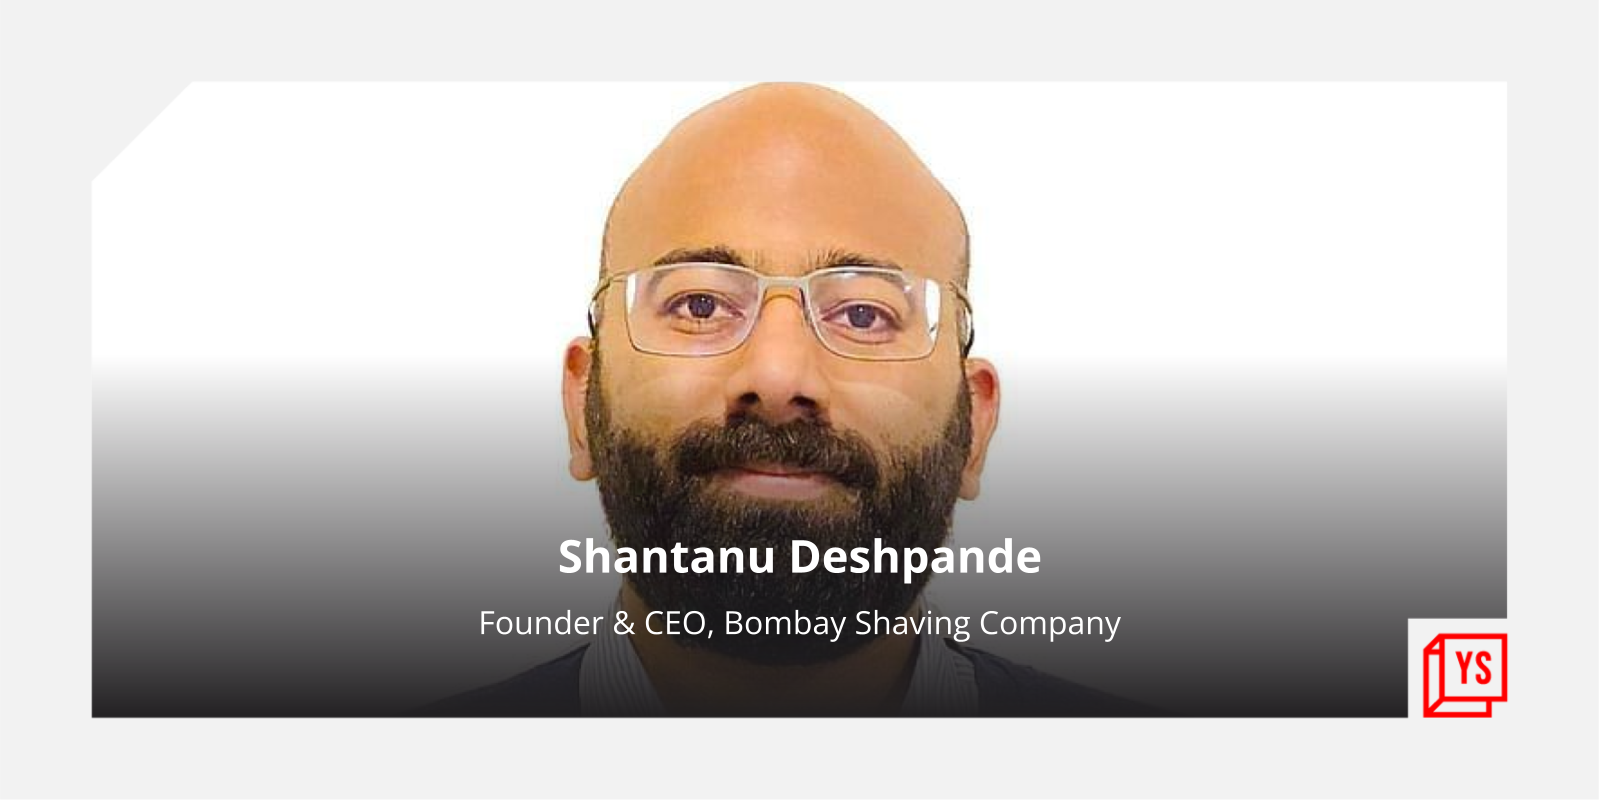 [Funding alert] Bombay Shaving Company raises Rs 50 Cr from GII in follow-on Series C round 